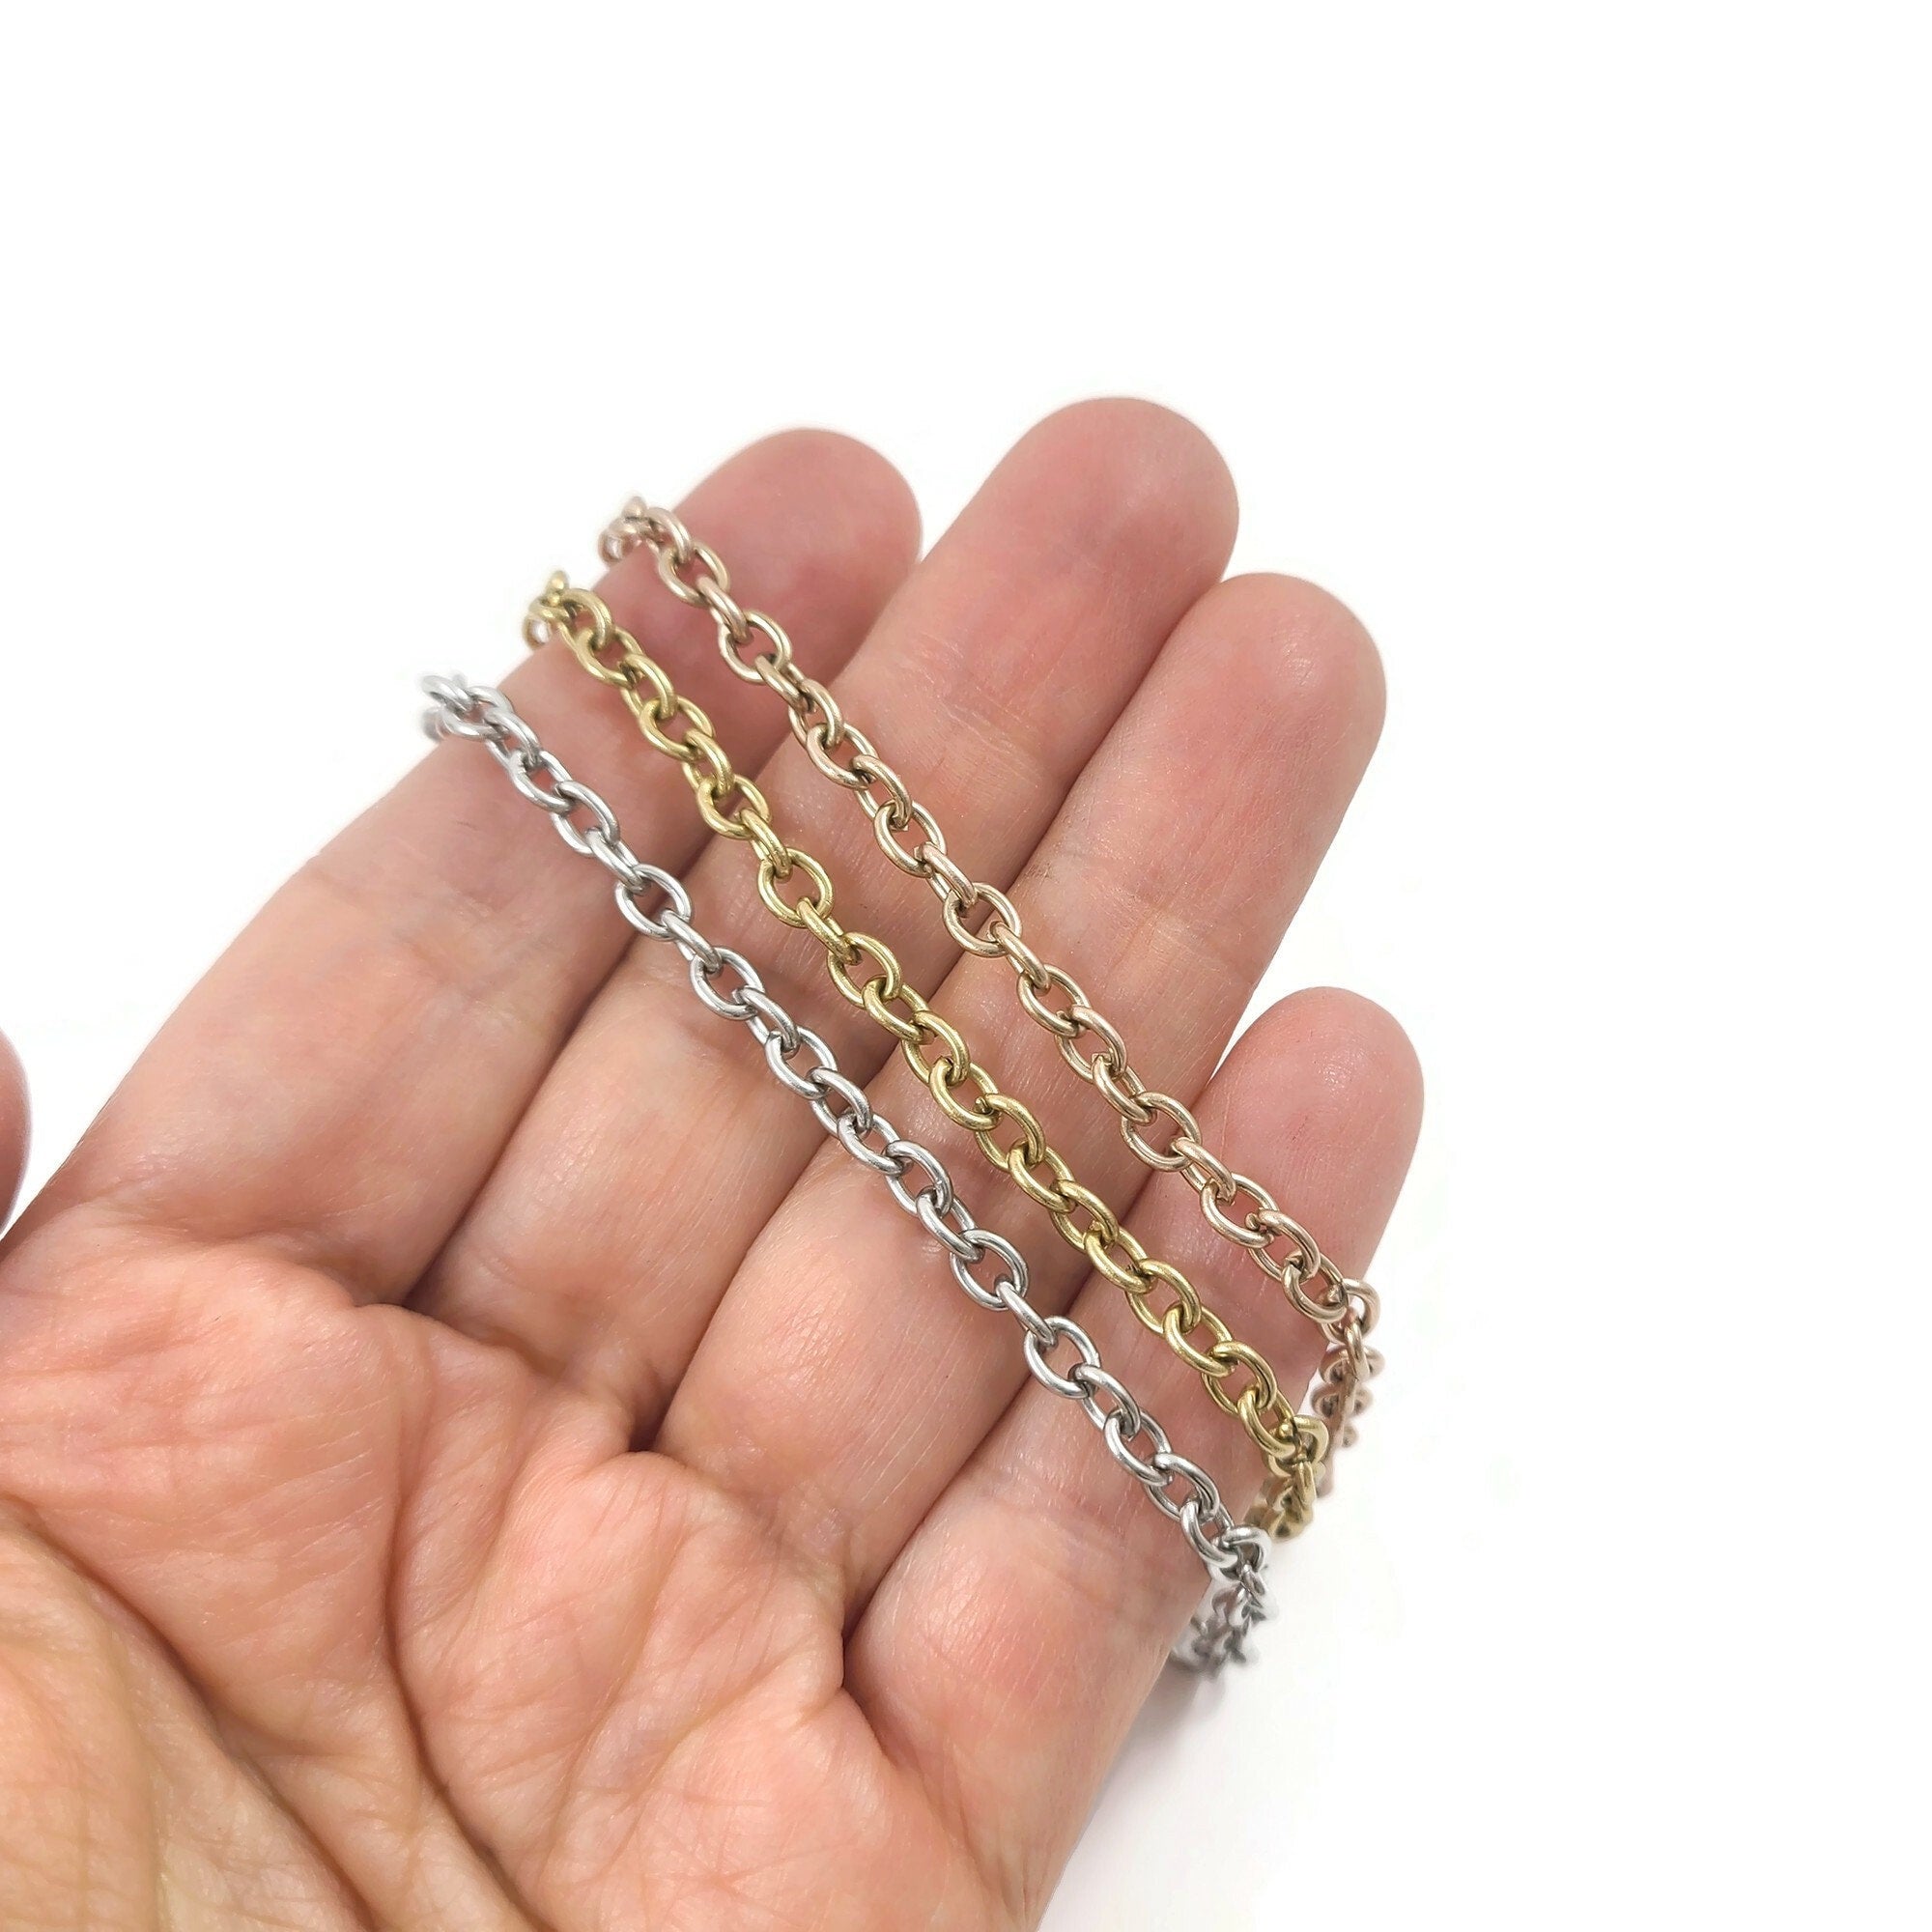 Chunky cable chain bracelet, Rose gold - gold - silver stainless steel, Bulk lot for hypoallergenic jewelry making